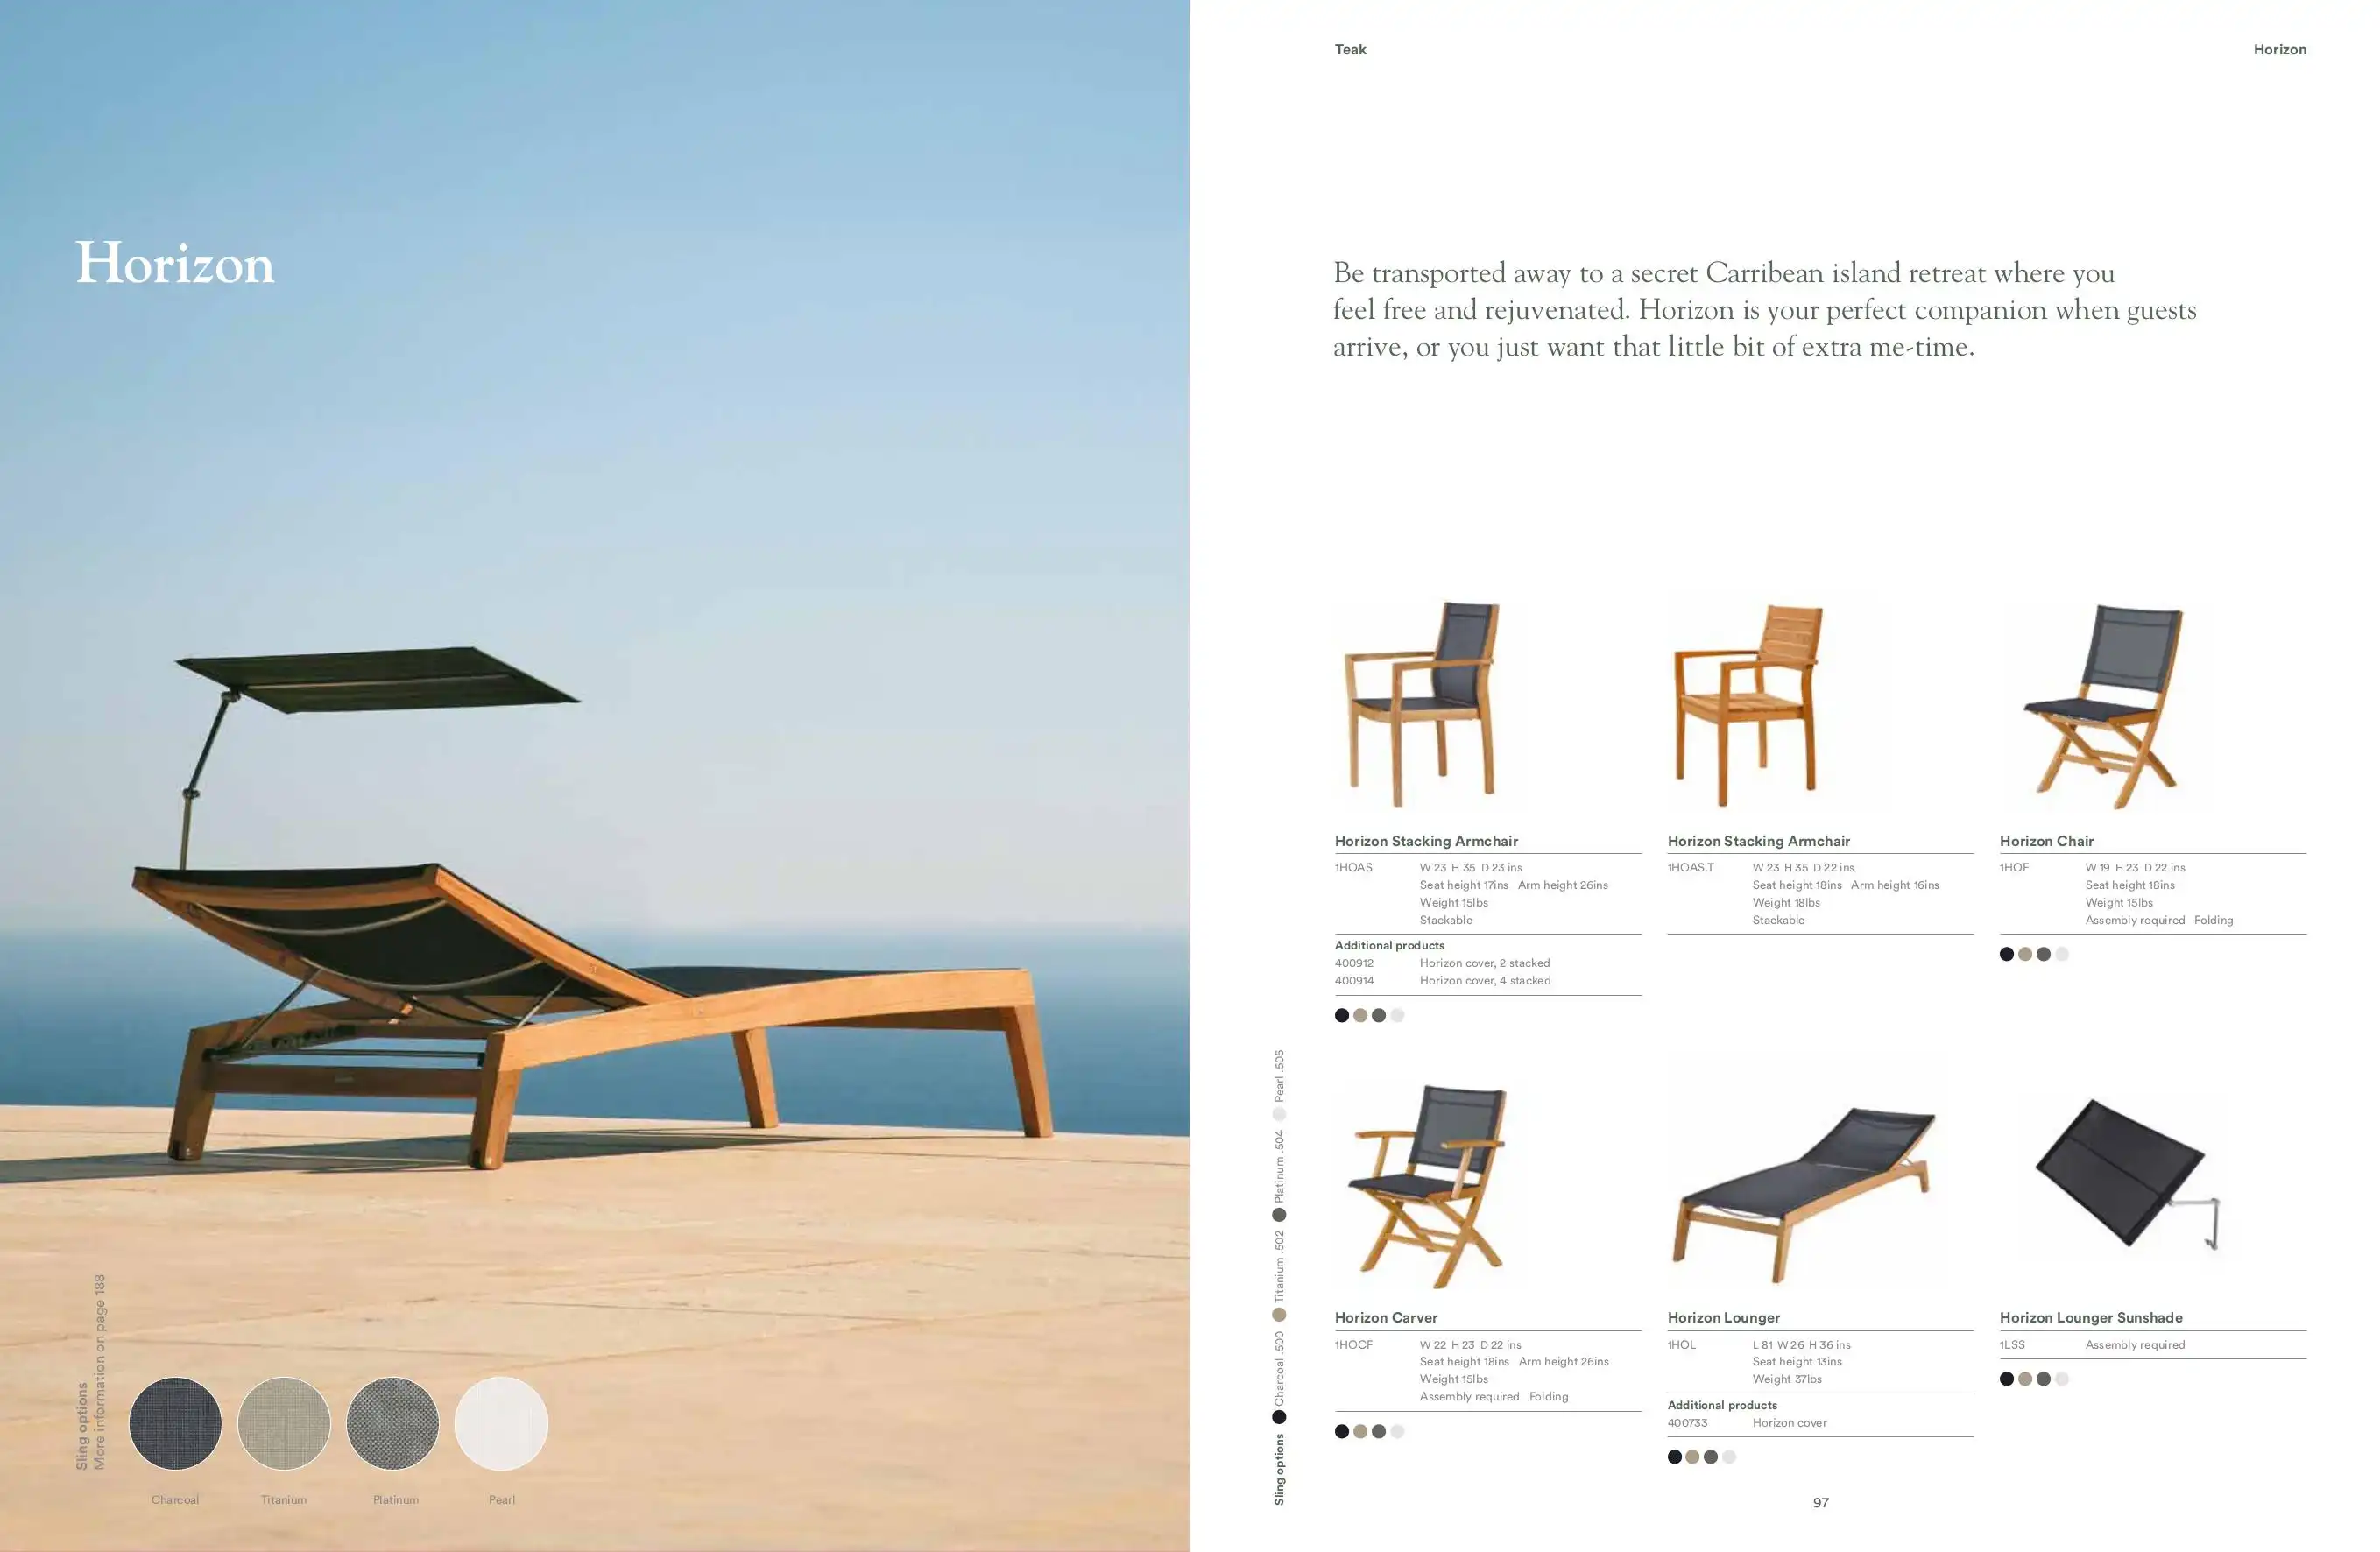 HORIZON (Teak) Loungers & Chairs by Barlow Tyrie